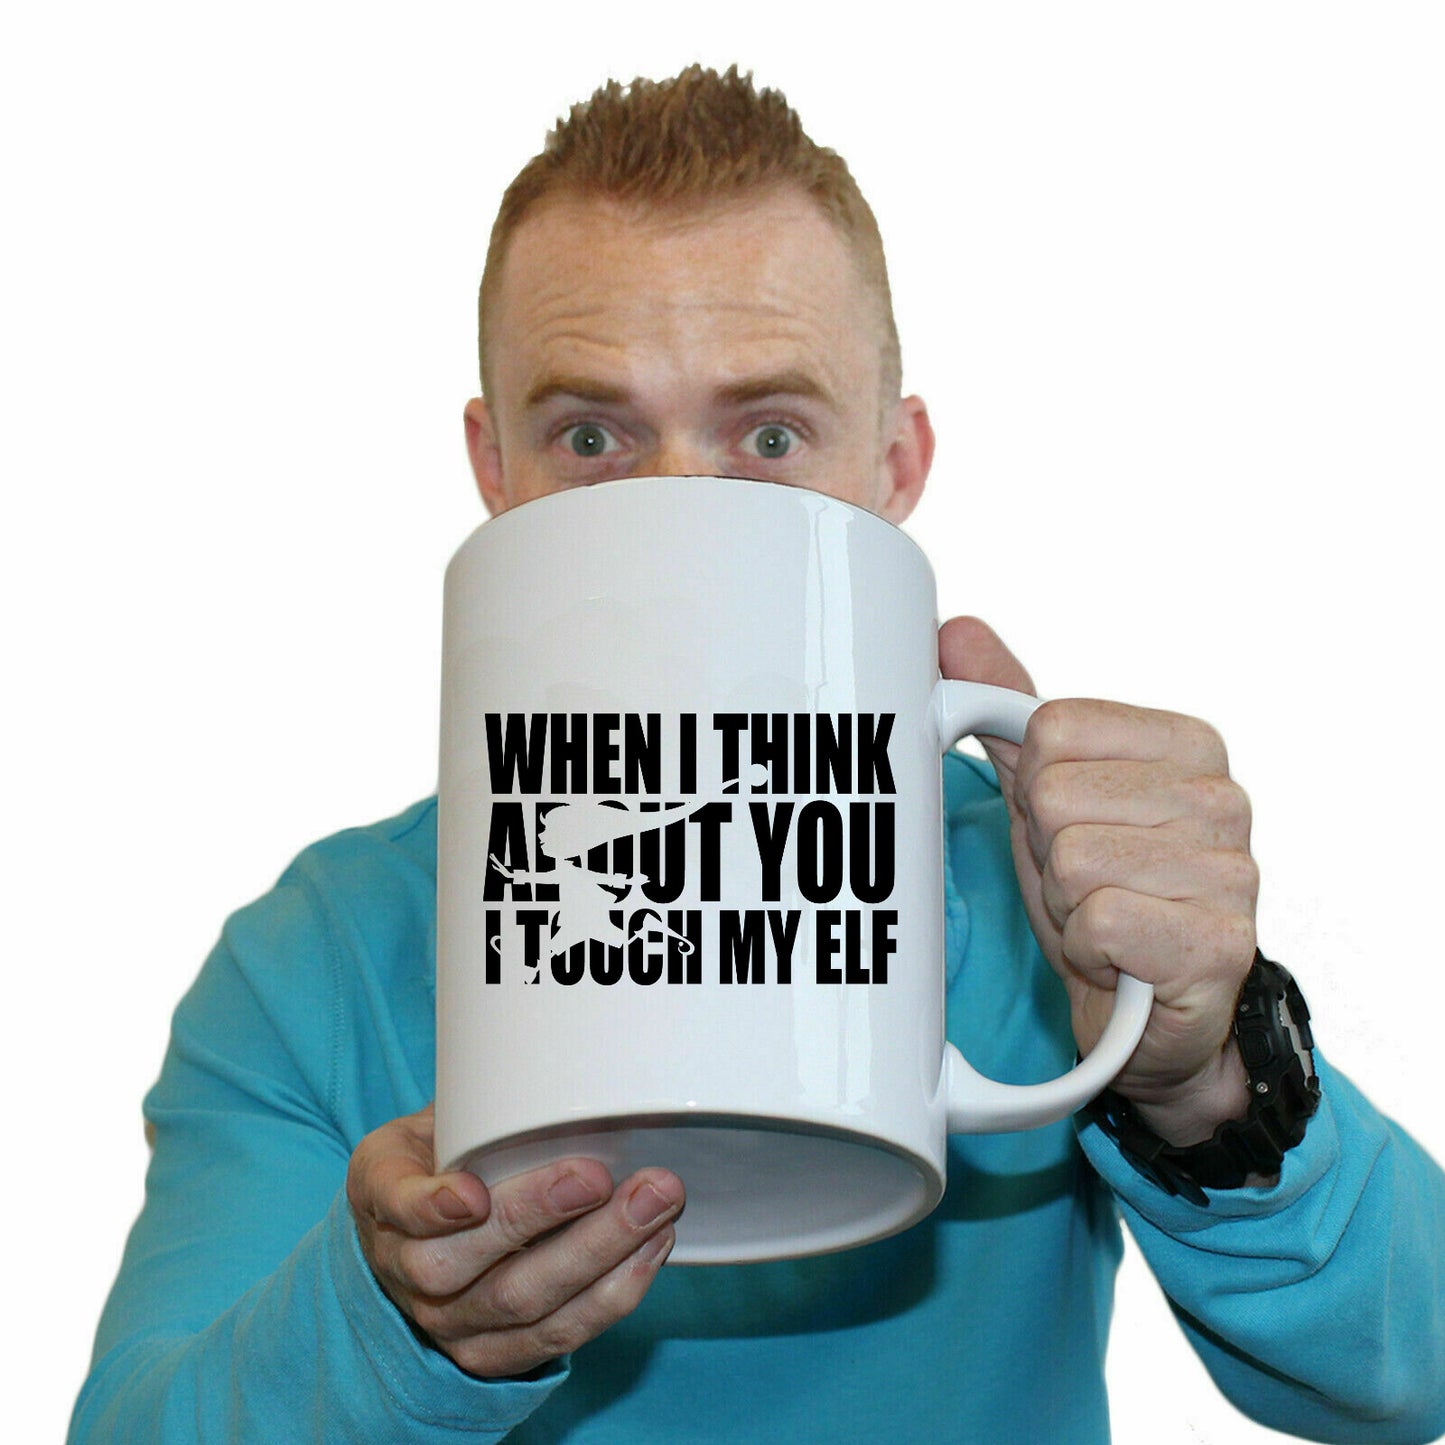 The Christmas Hub - Christmas When I Think About You I Touch My Elf - Funny Giant 2 Litre Mug